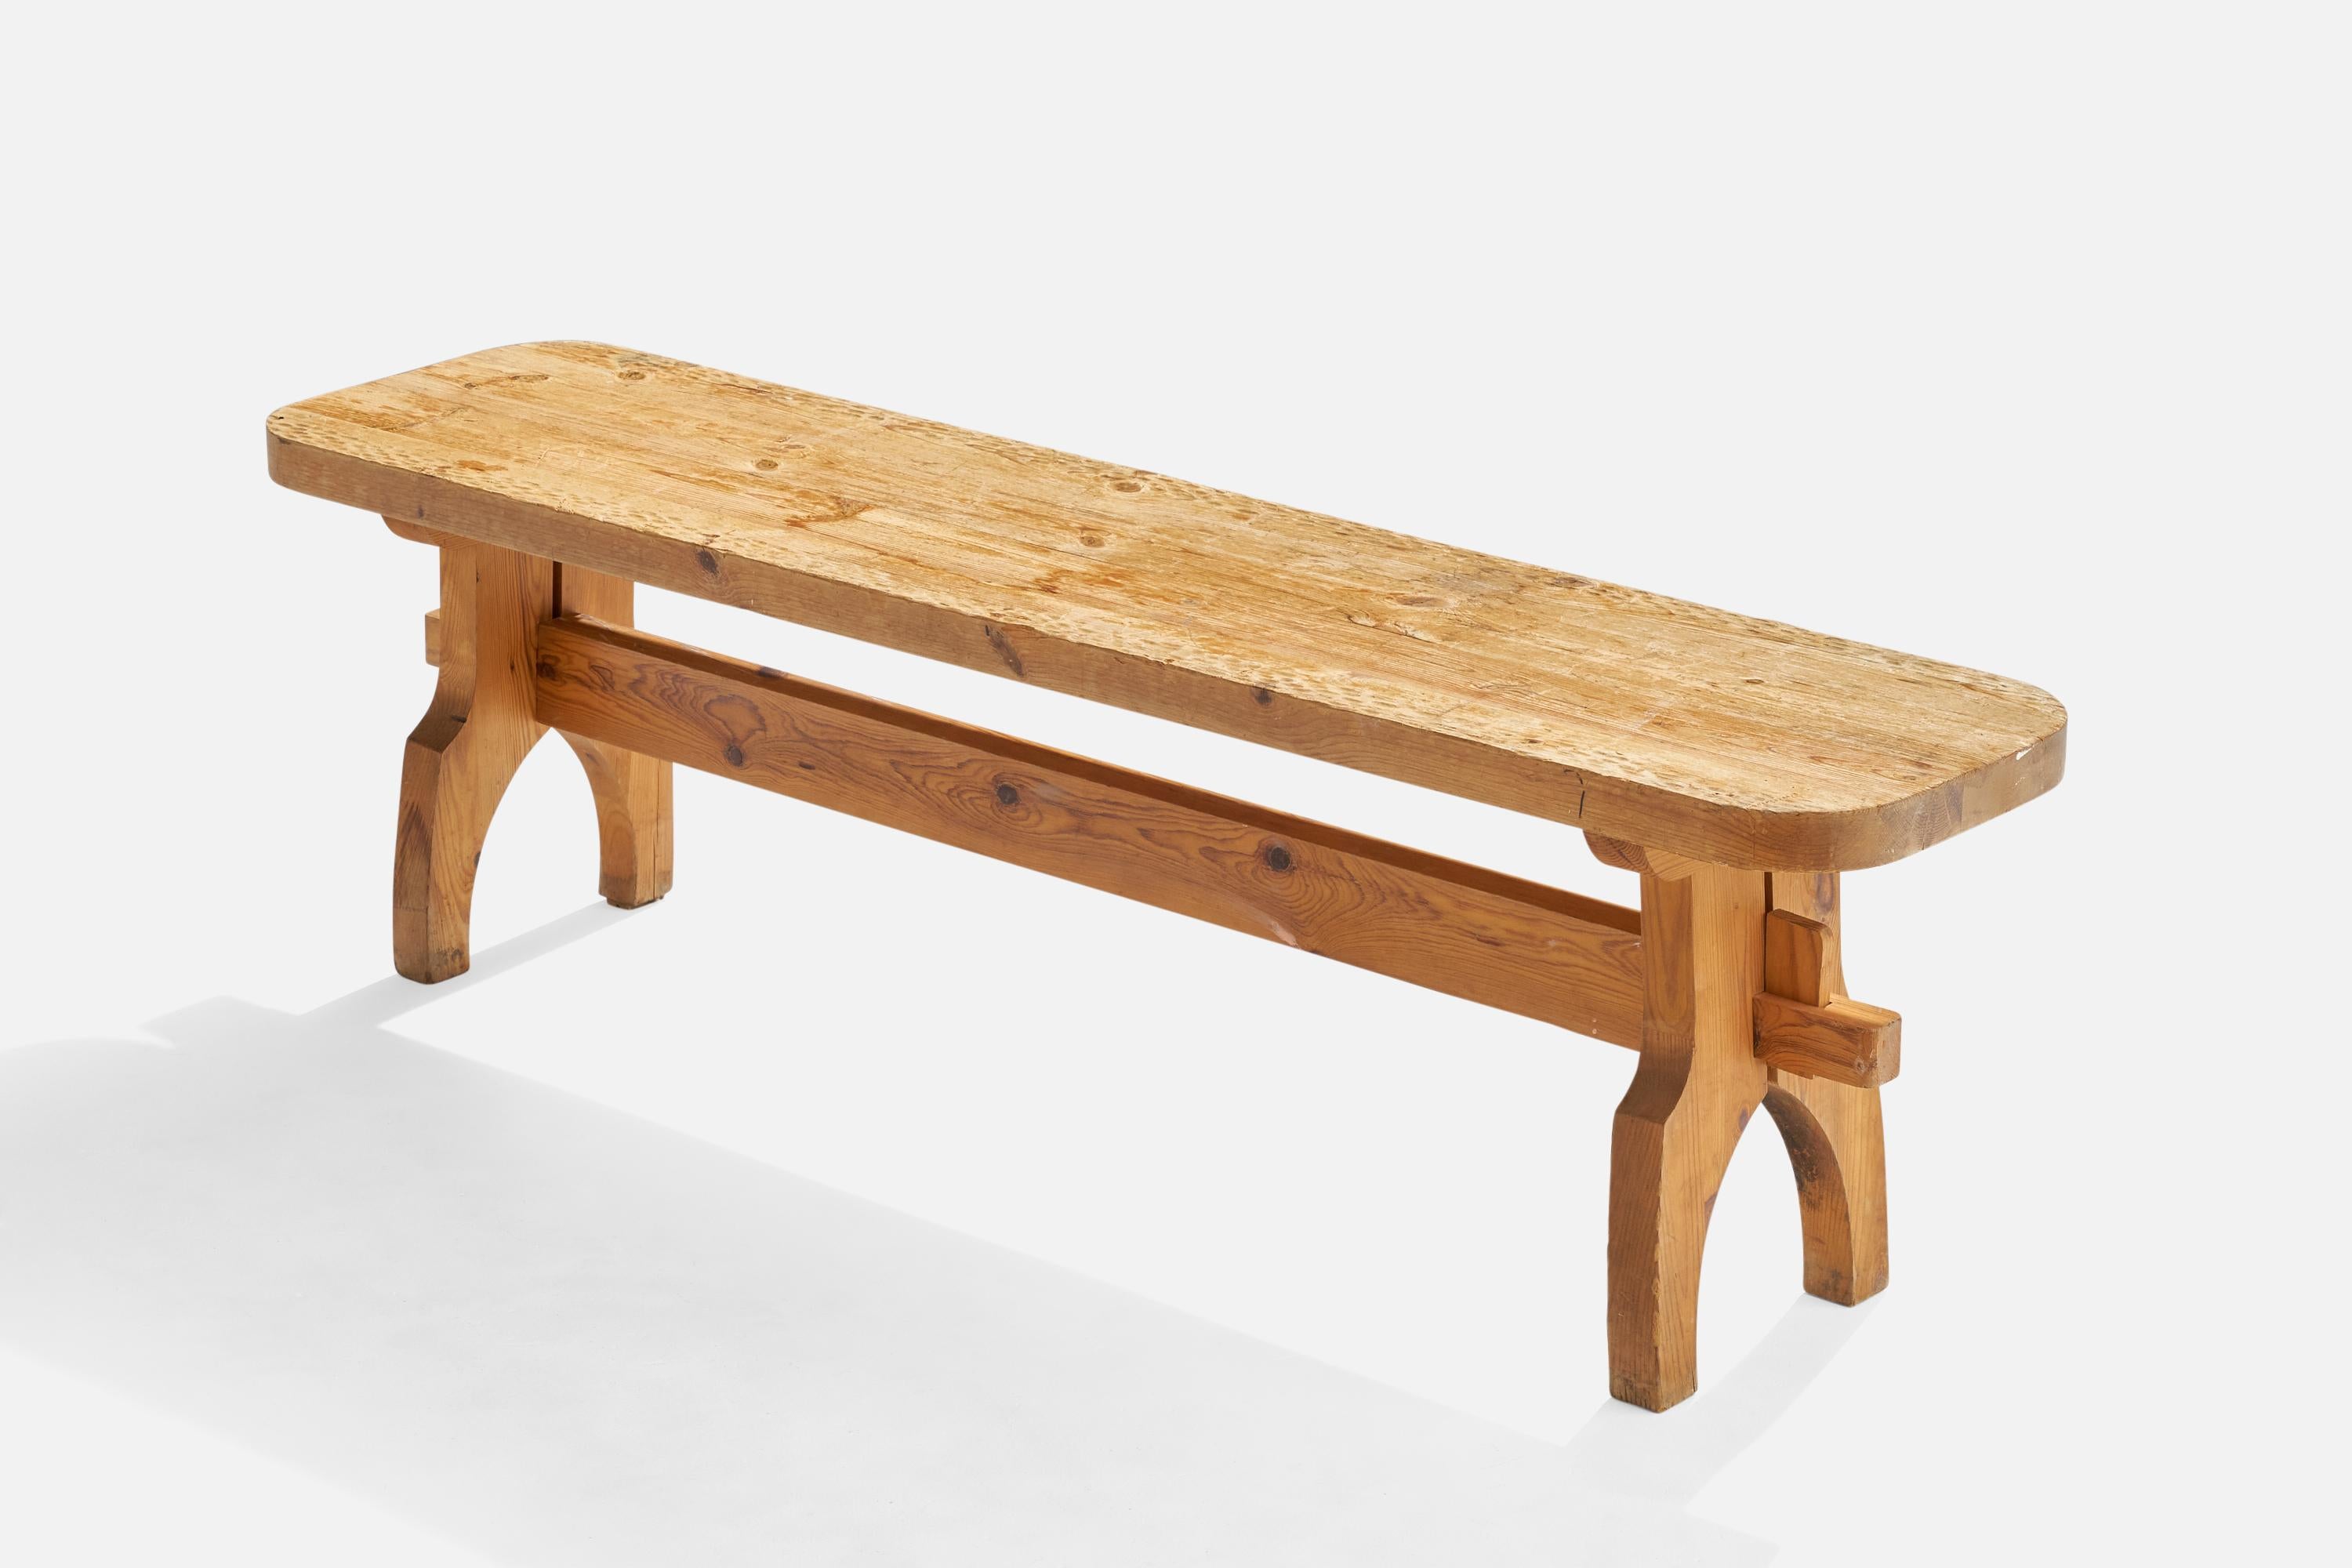 A pine bench with hand-carved details designed and produced in Sweden, c. 1960s.